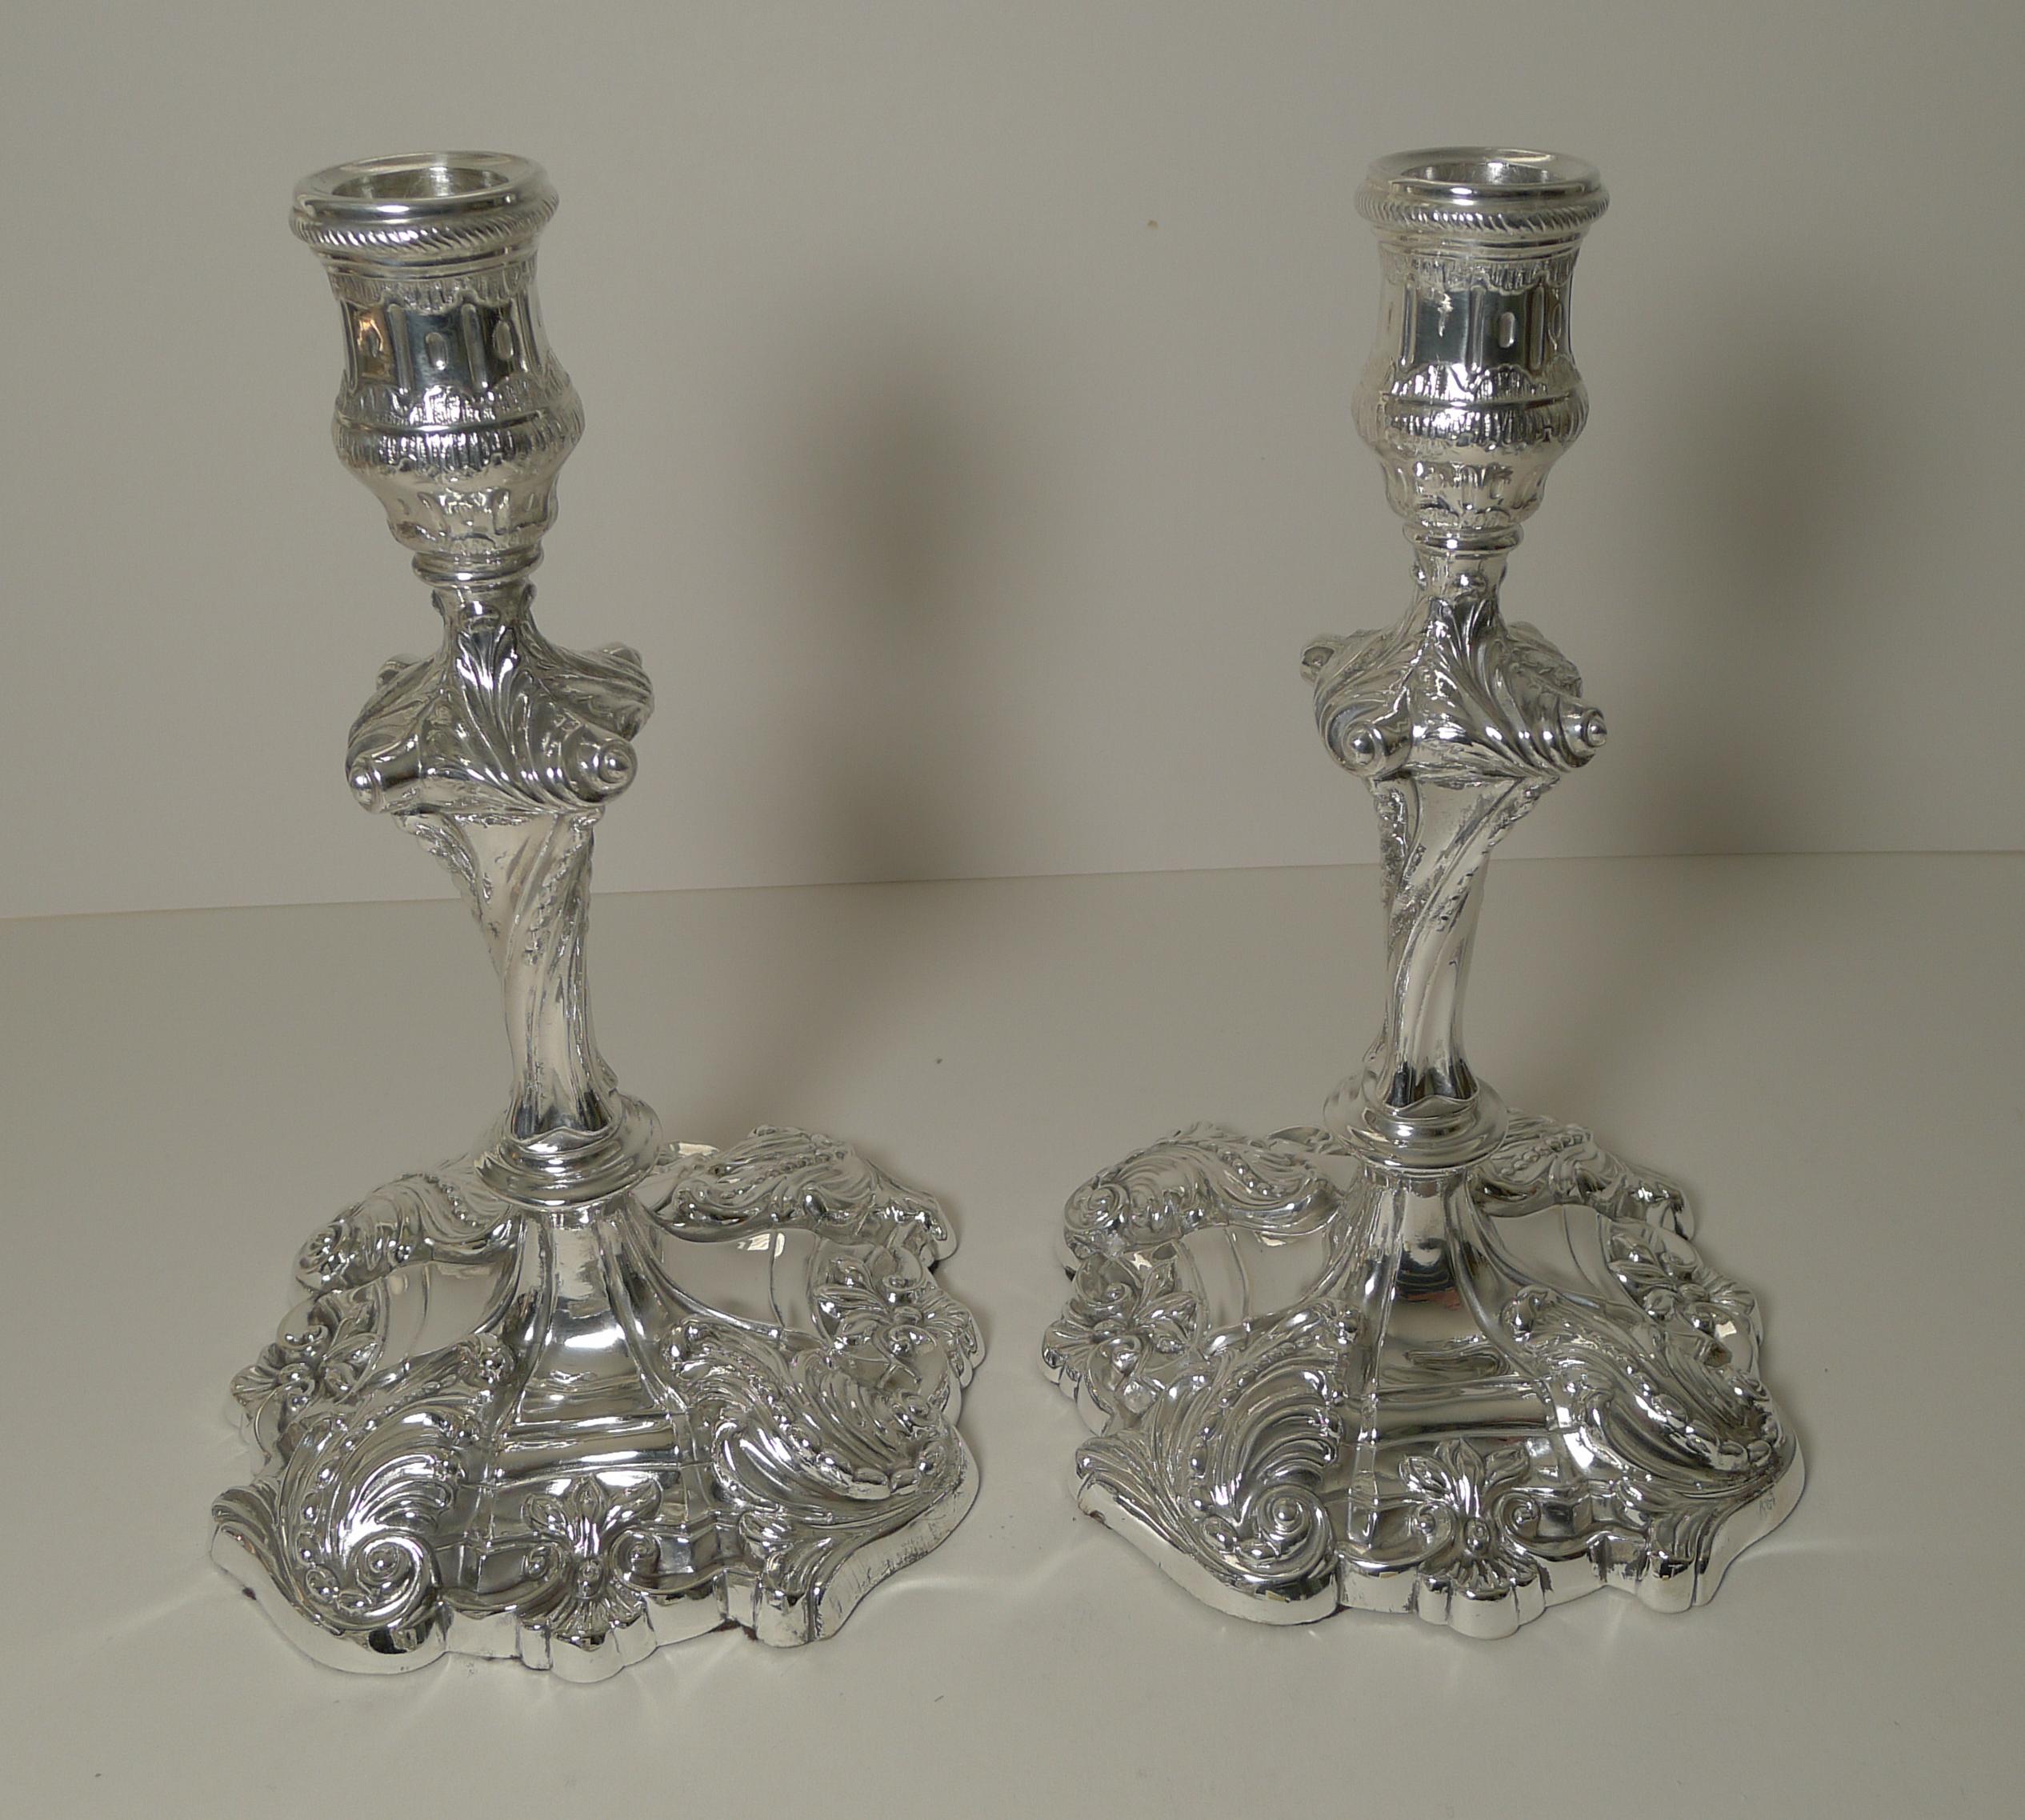 British Pair Antique English Silver Plated Candelabra by Jenkins & Timm, c.1900